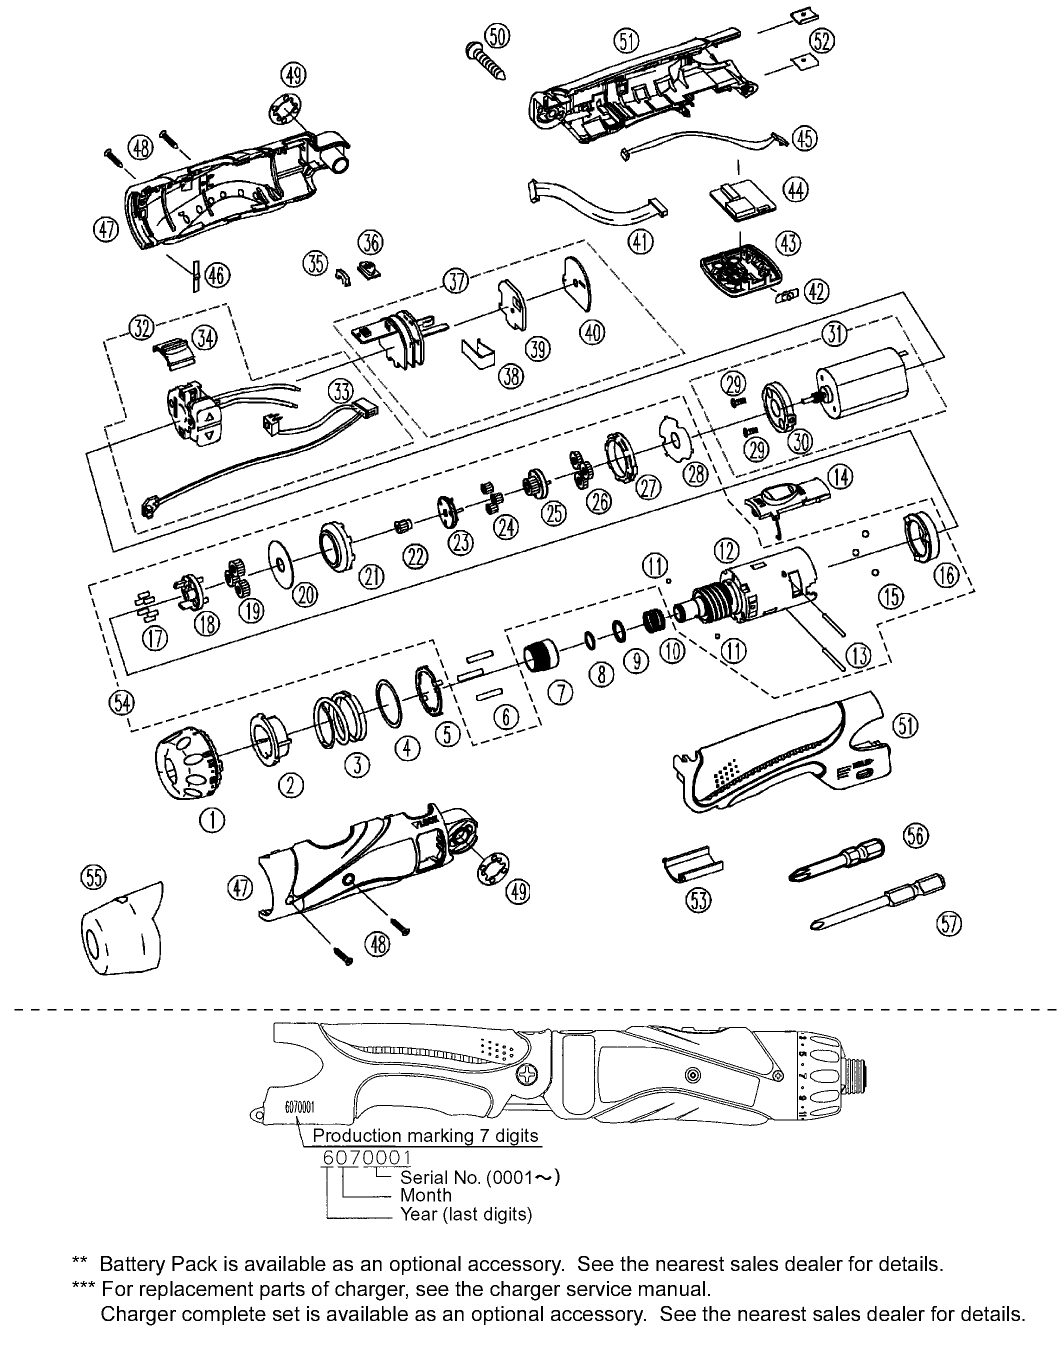 EY7411: Exploded View